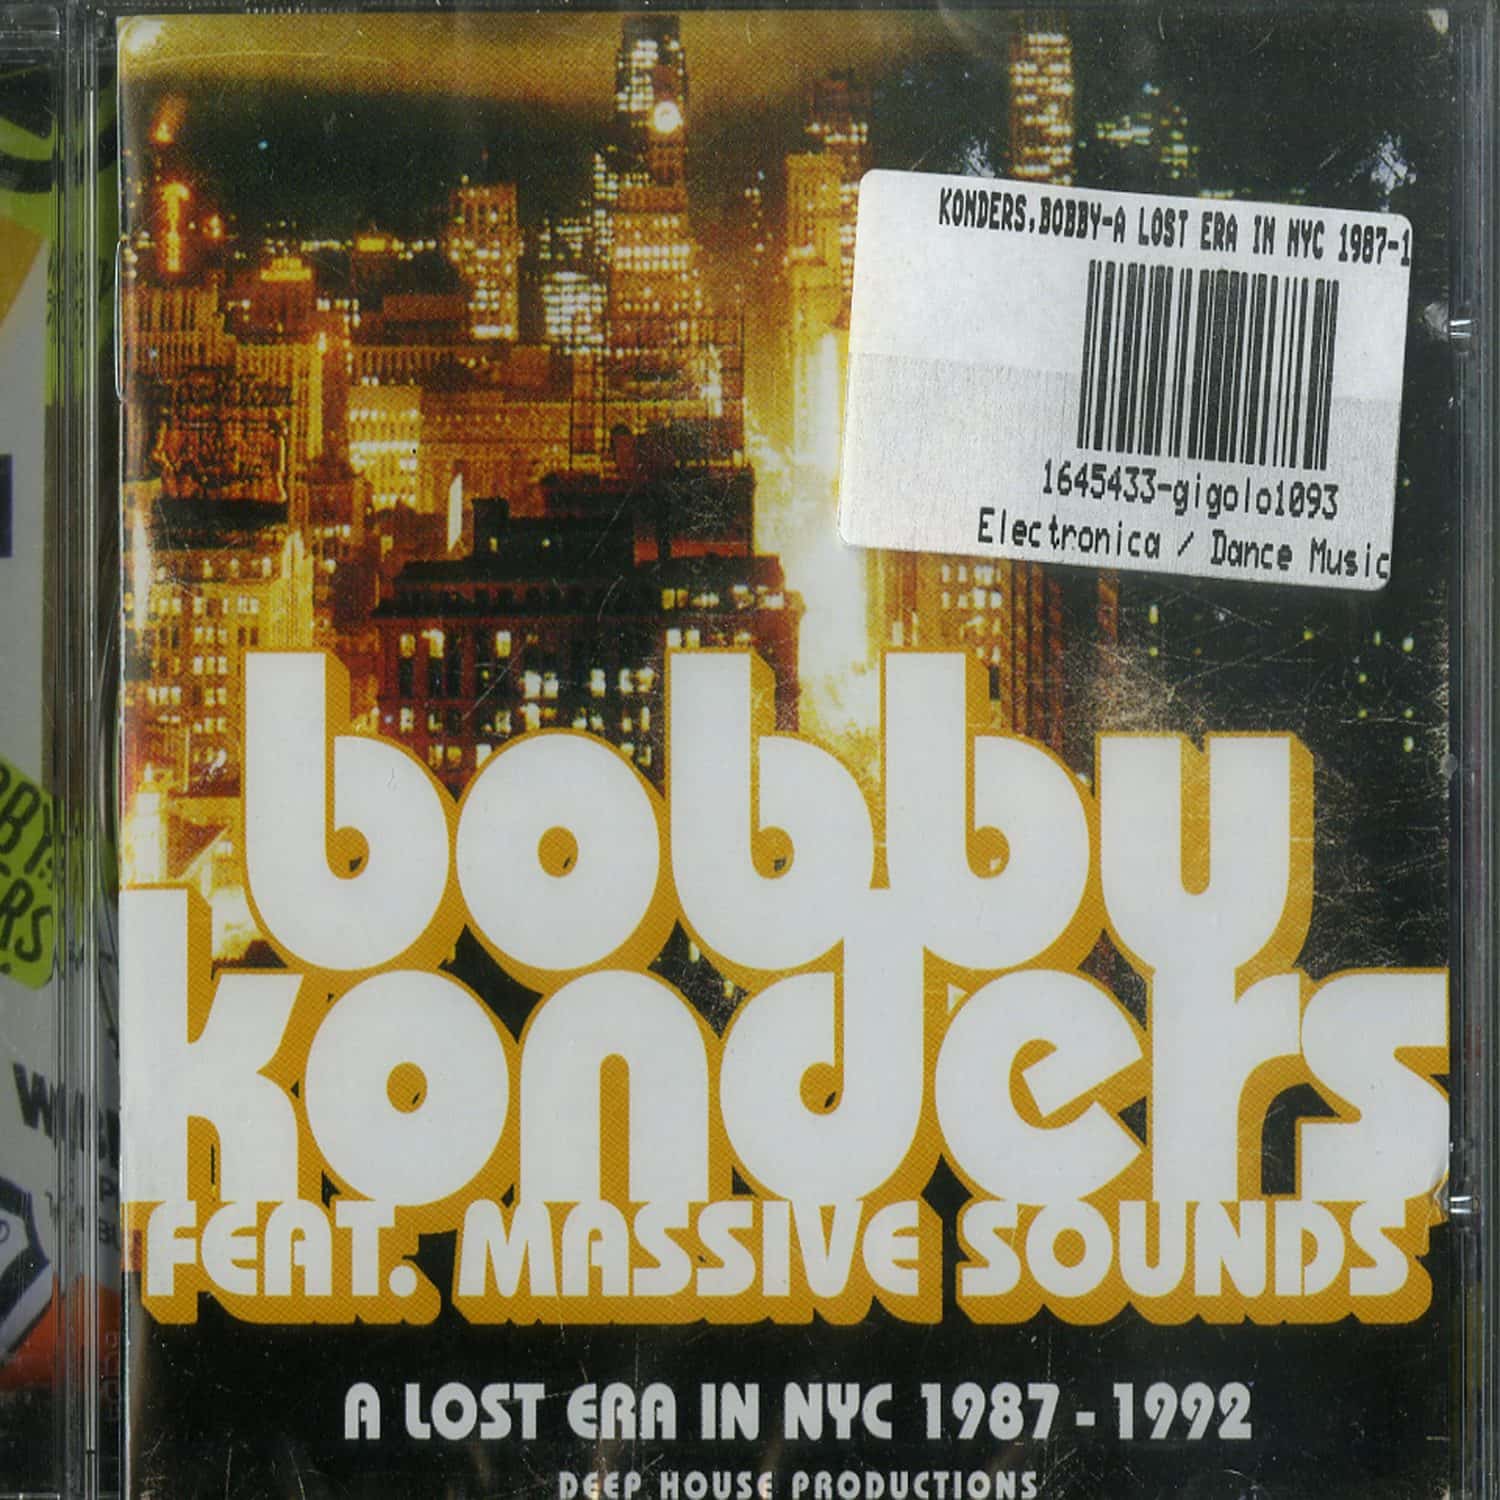 Bobby Konders feat. Massive Sounds - A LOST ERA IN NYC 87-92 